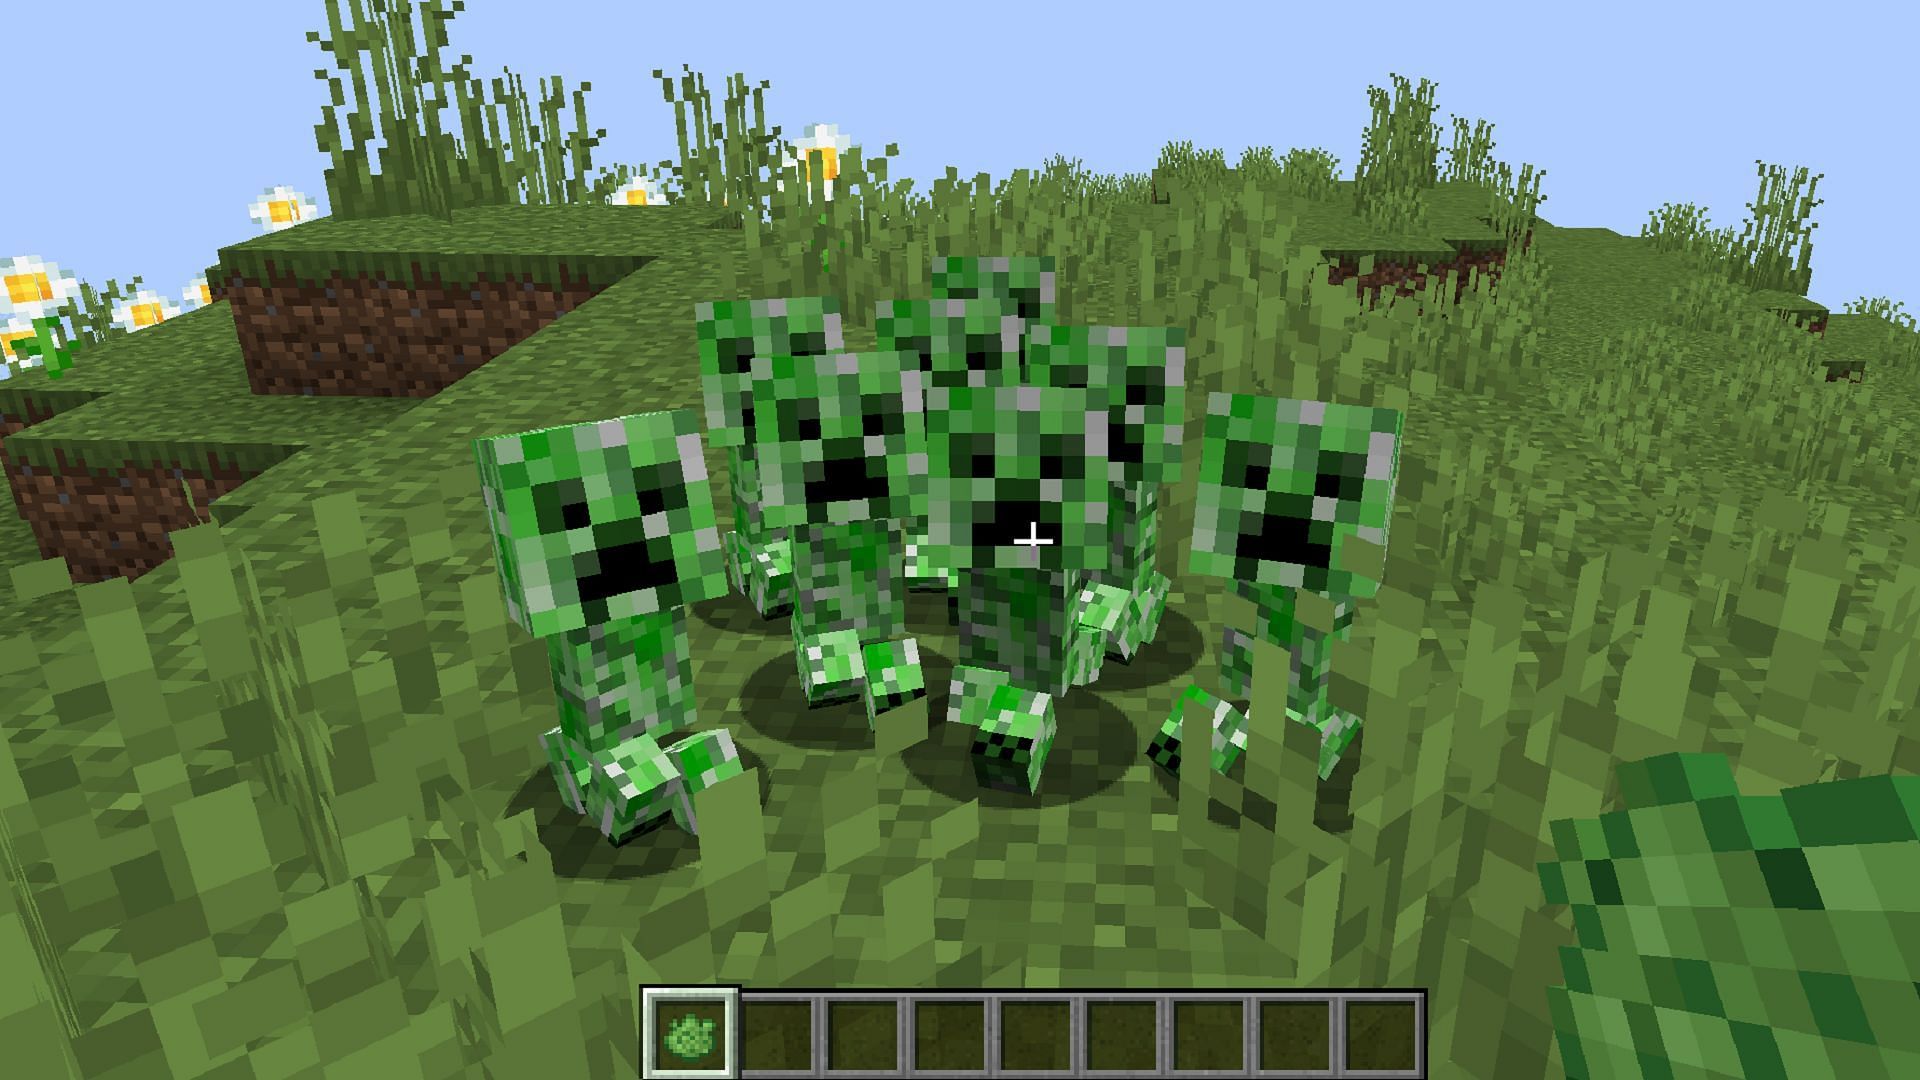 Creeper spores can attack players in Savage &amp; Ravage (Image via TeamAbnormals/CurseForge)